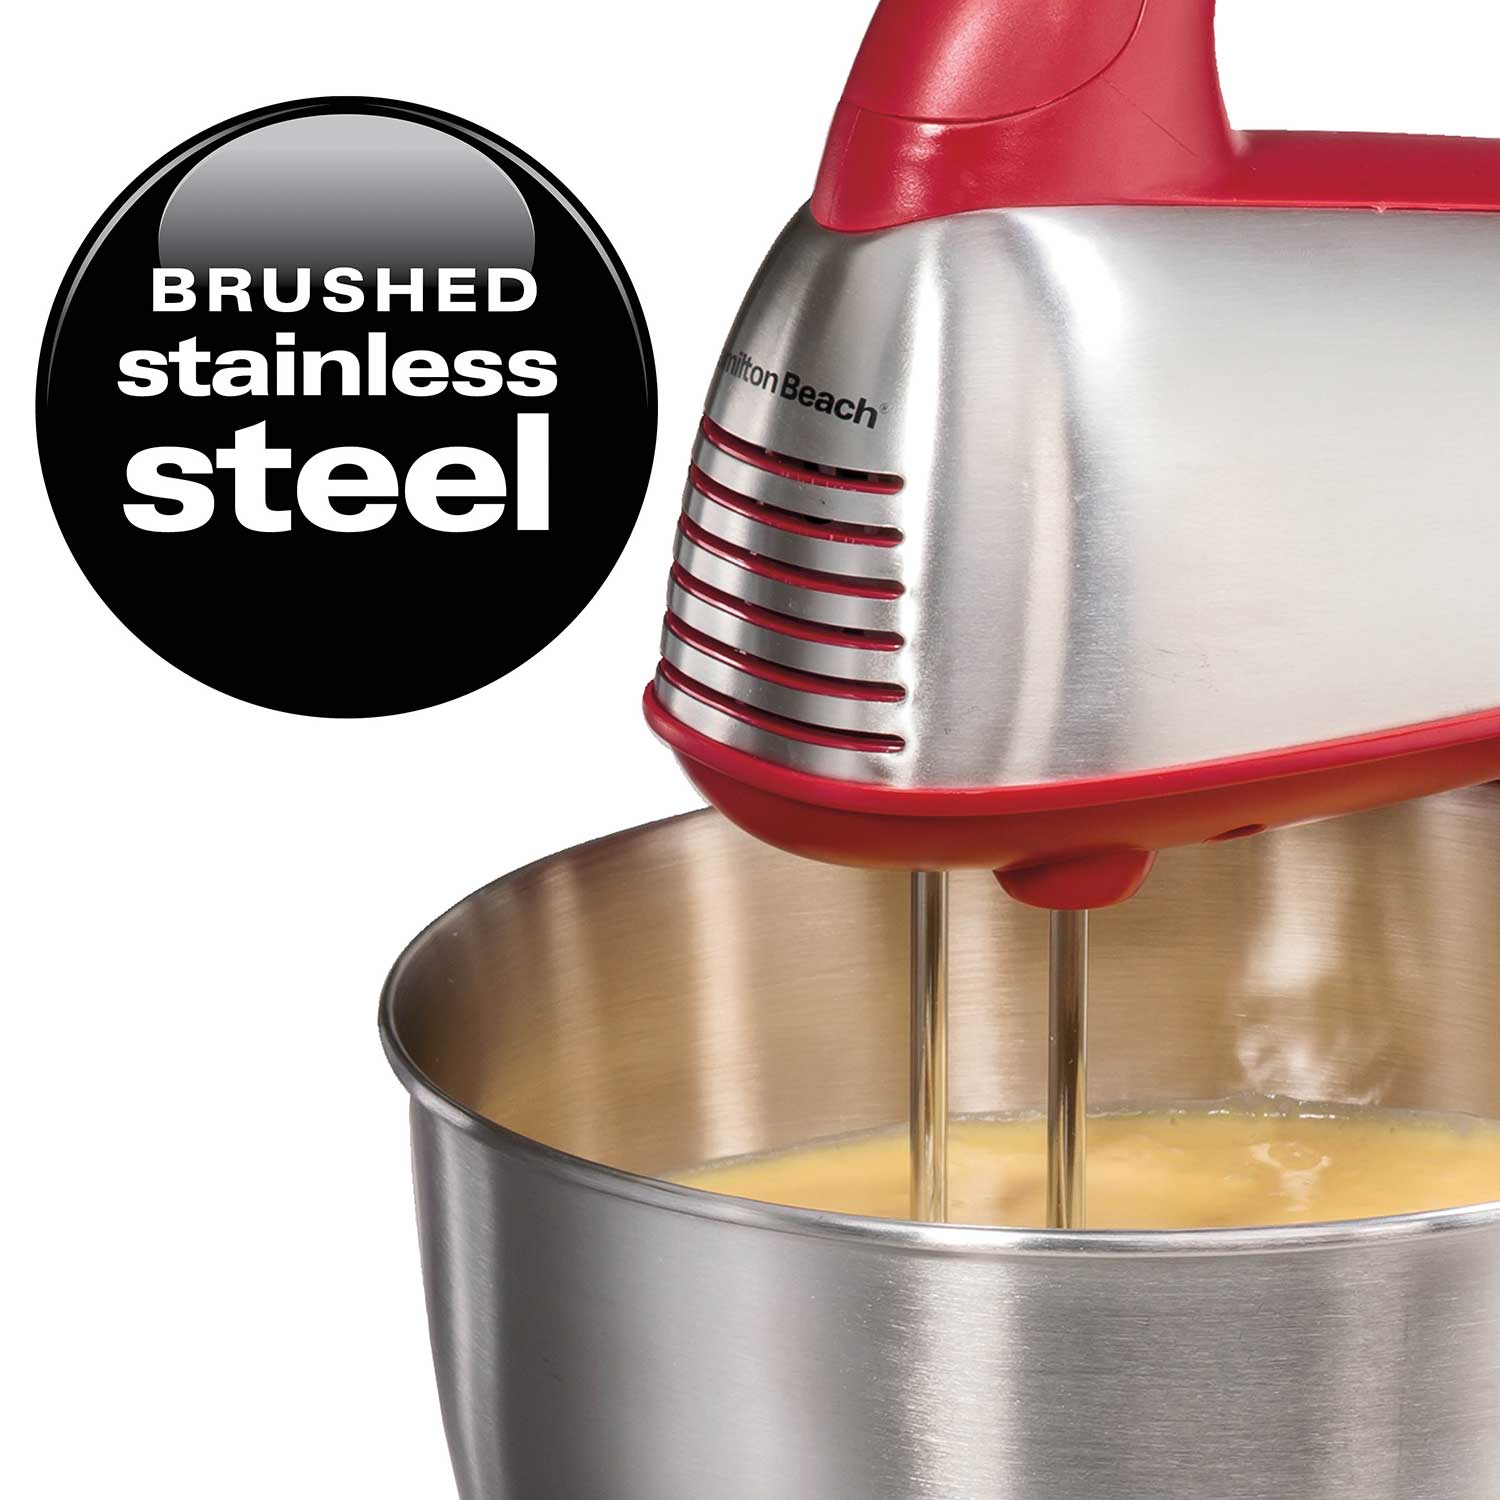 Hamilton Beach 6 Speed Classic Hand-Stand Mixer (64650) - Stainless Steel